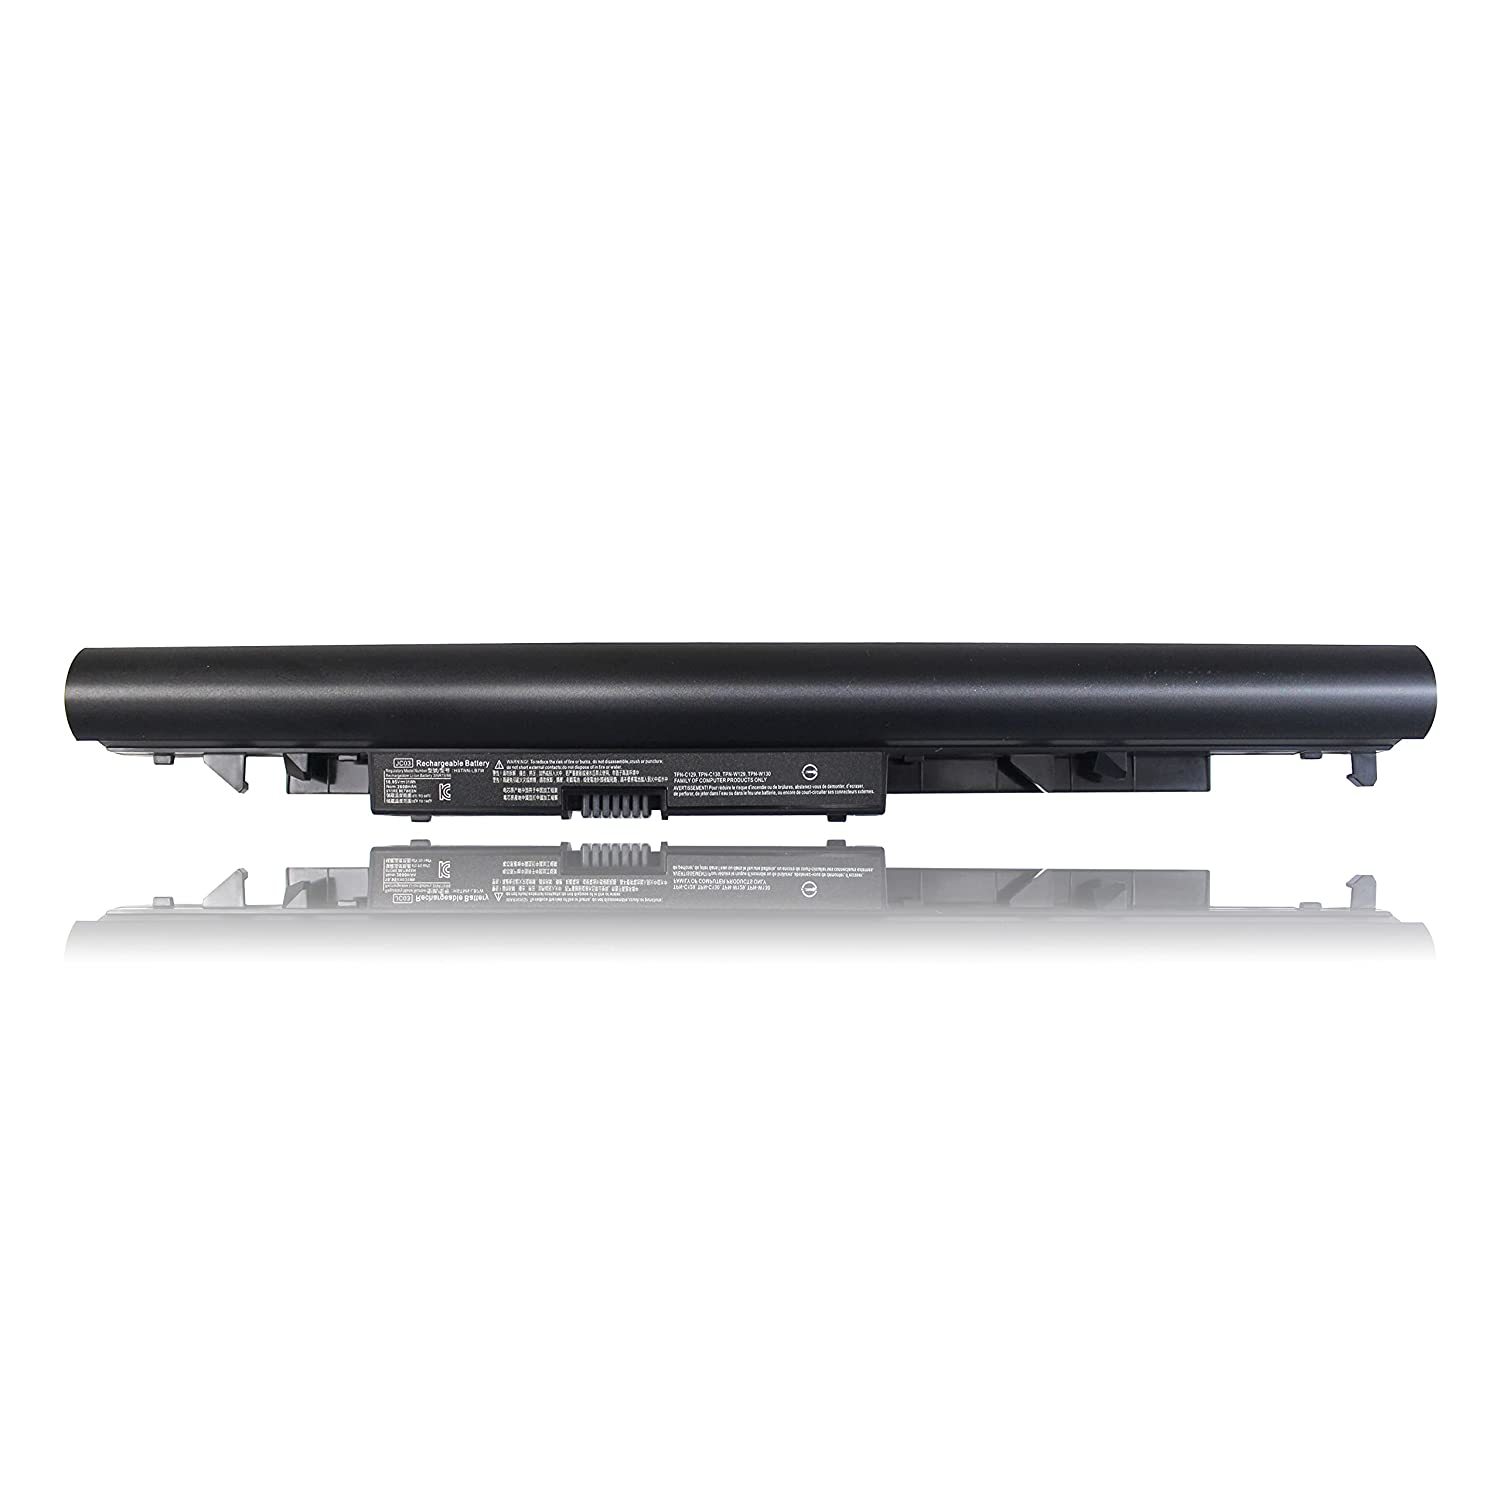 Jc03 919700-850 Laptop Battery For Hp 15-Bs 15-Bw 17-Bs Series 15-Bs015Dx 15-Bs0